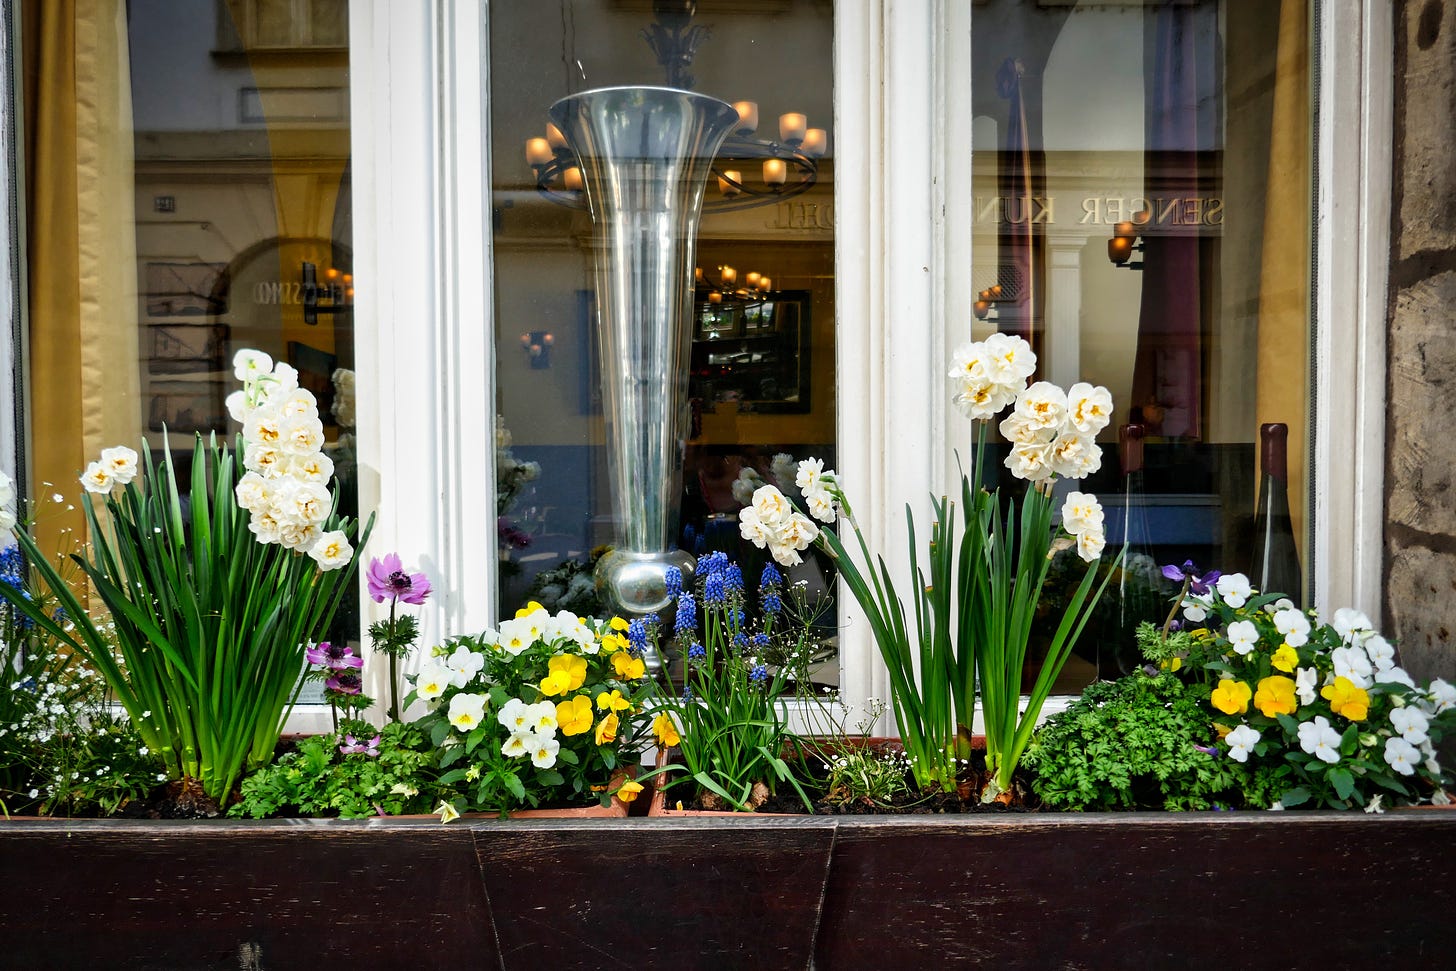 A window in front of a small shop in Germany with a window box full of blooming flowers. You can see a tall glass vase in the window and furnishings in the room.